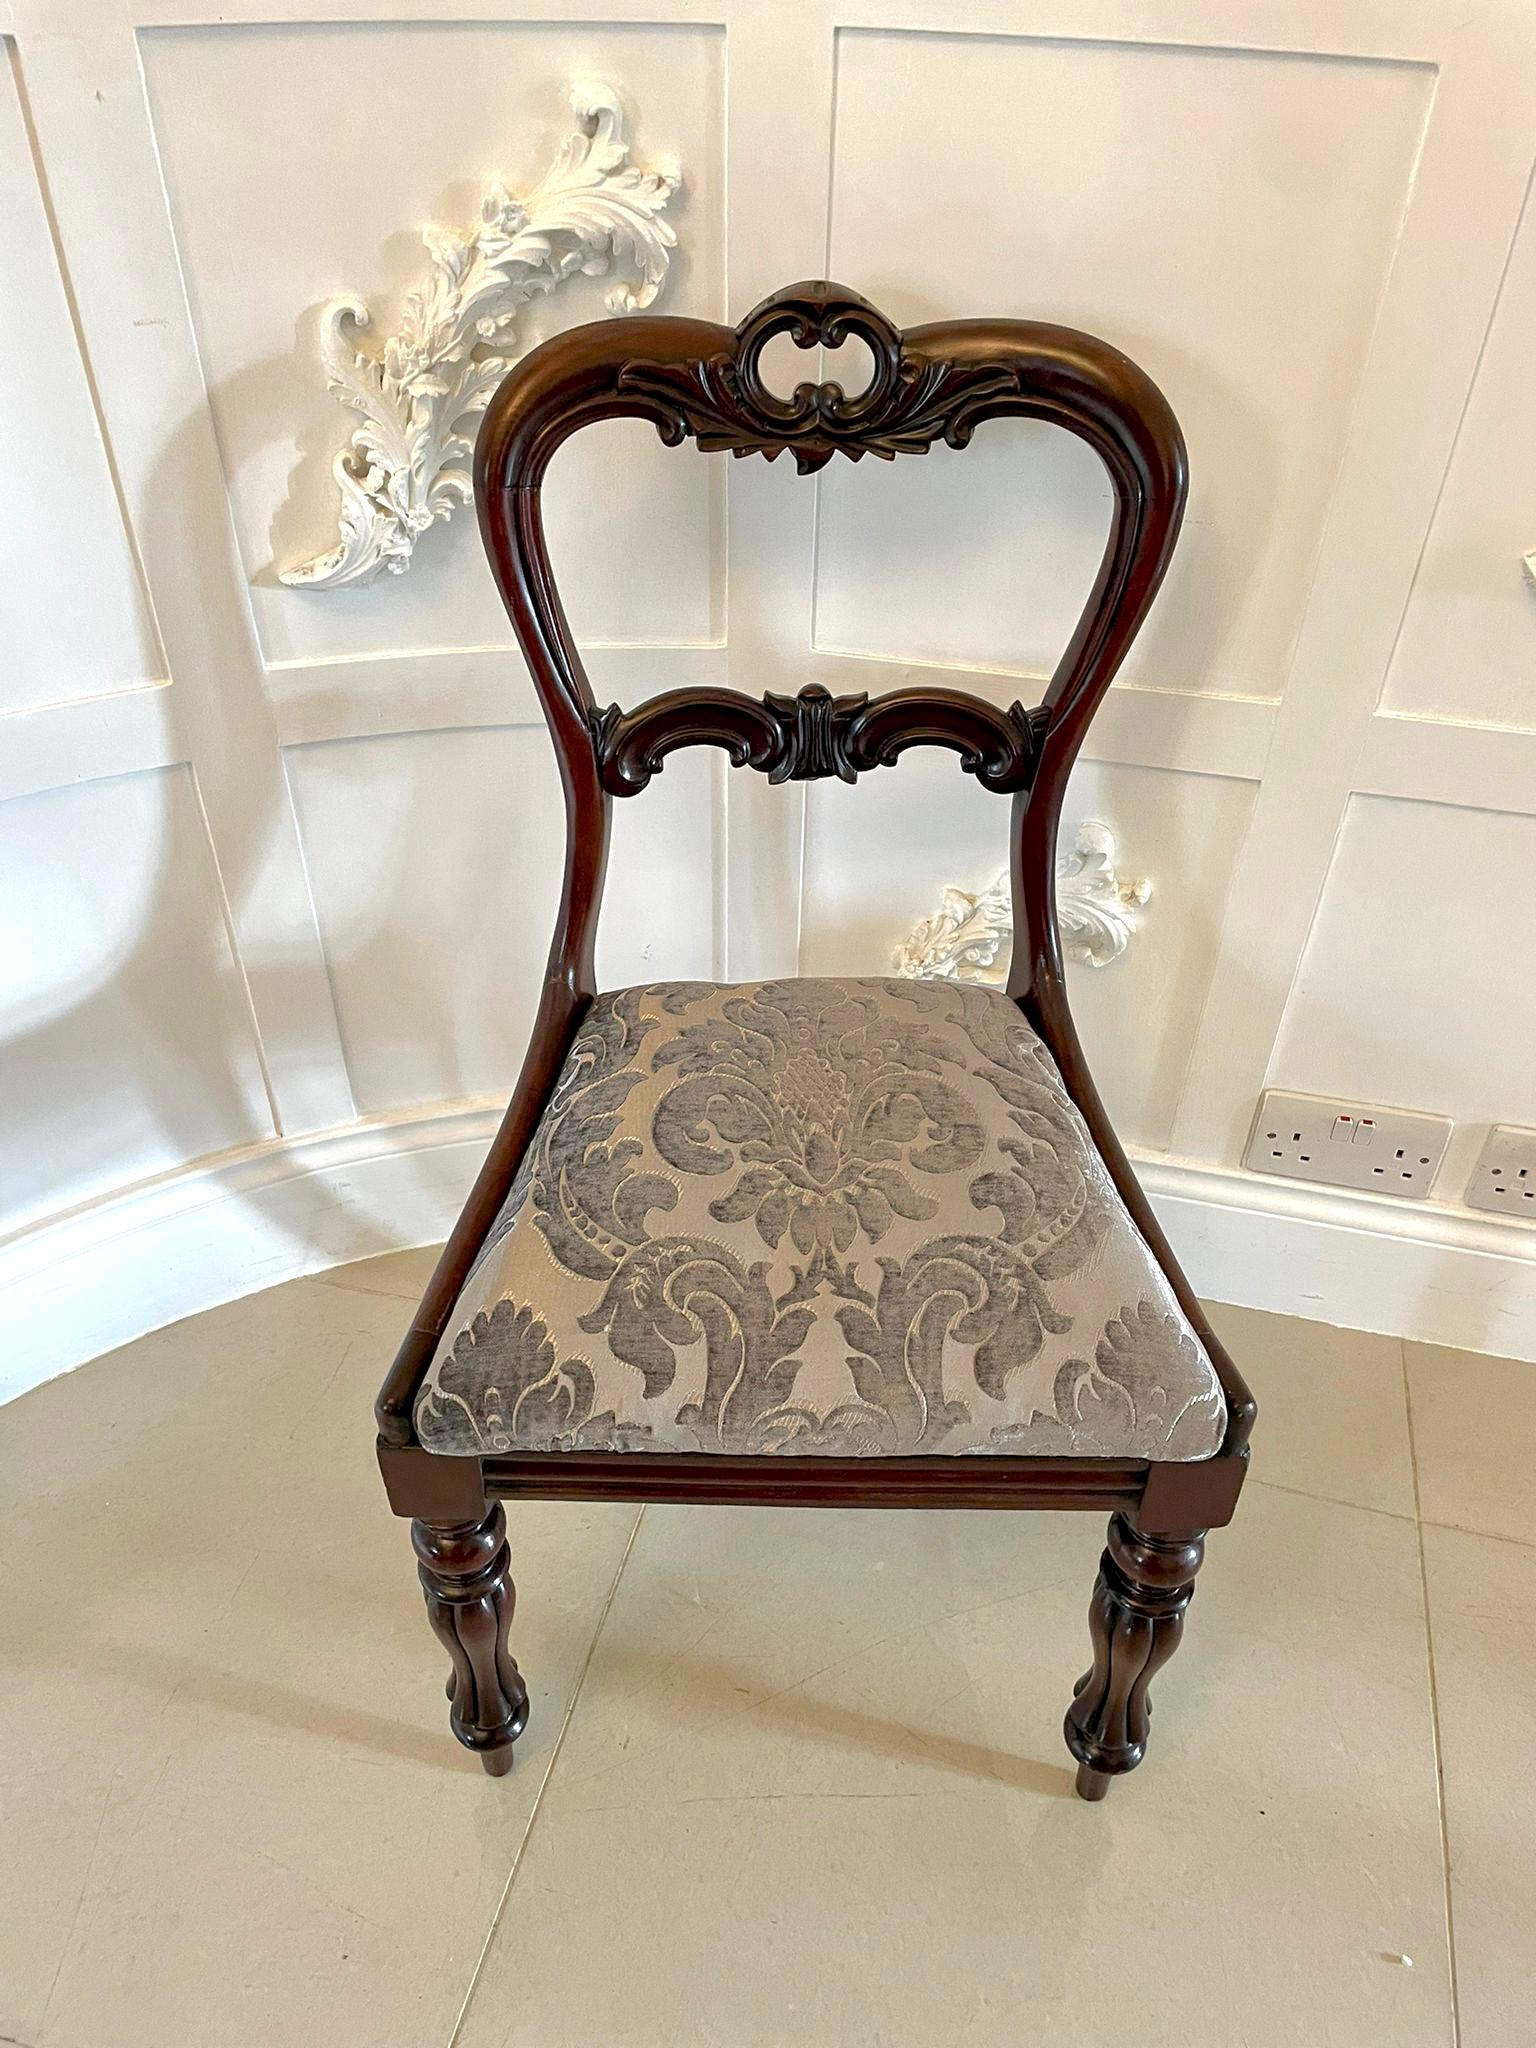 set of 4 antique chairs